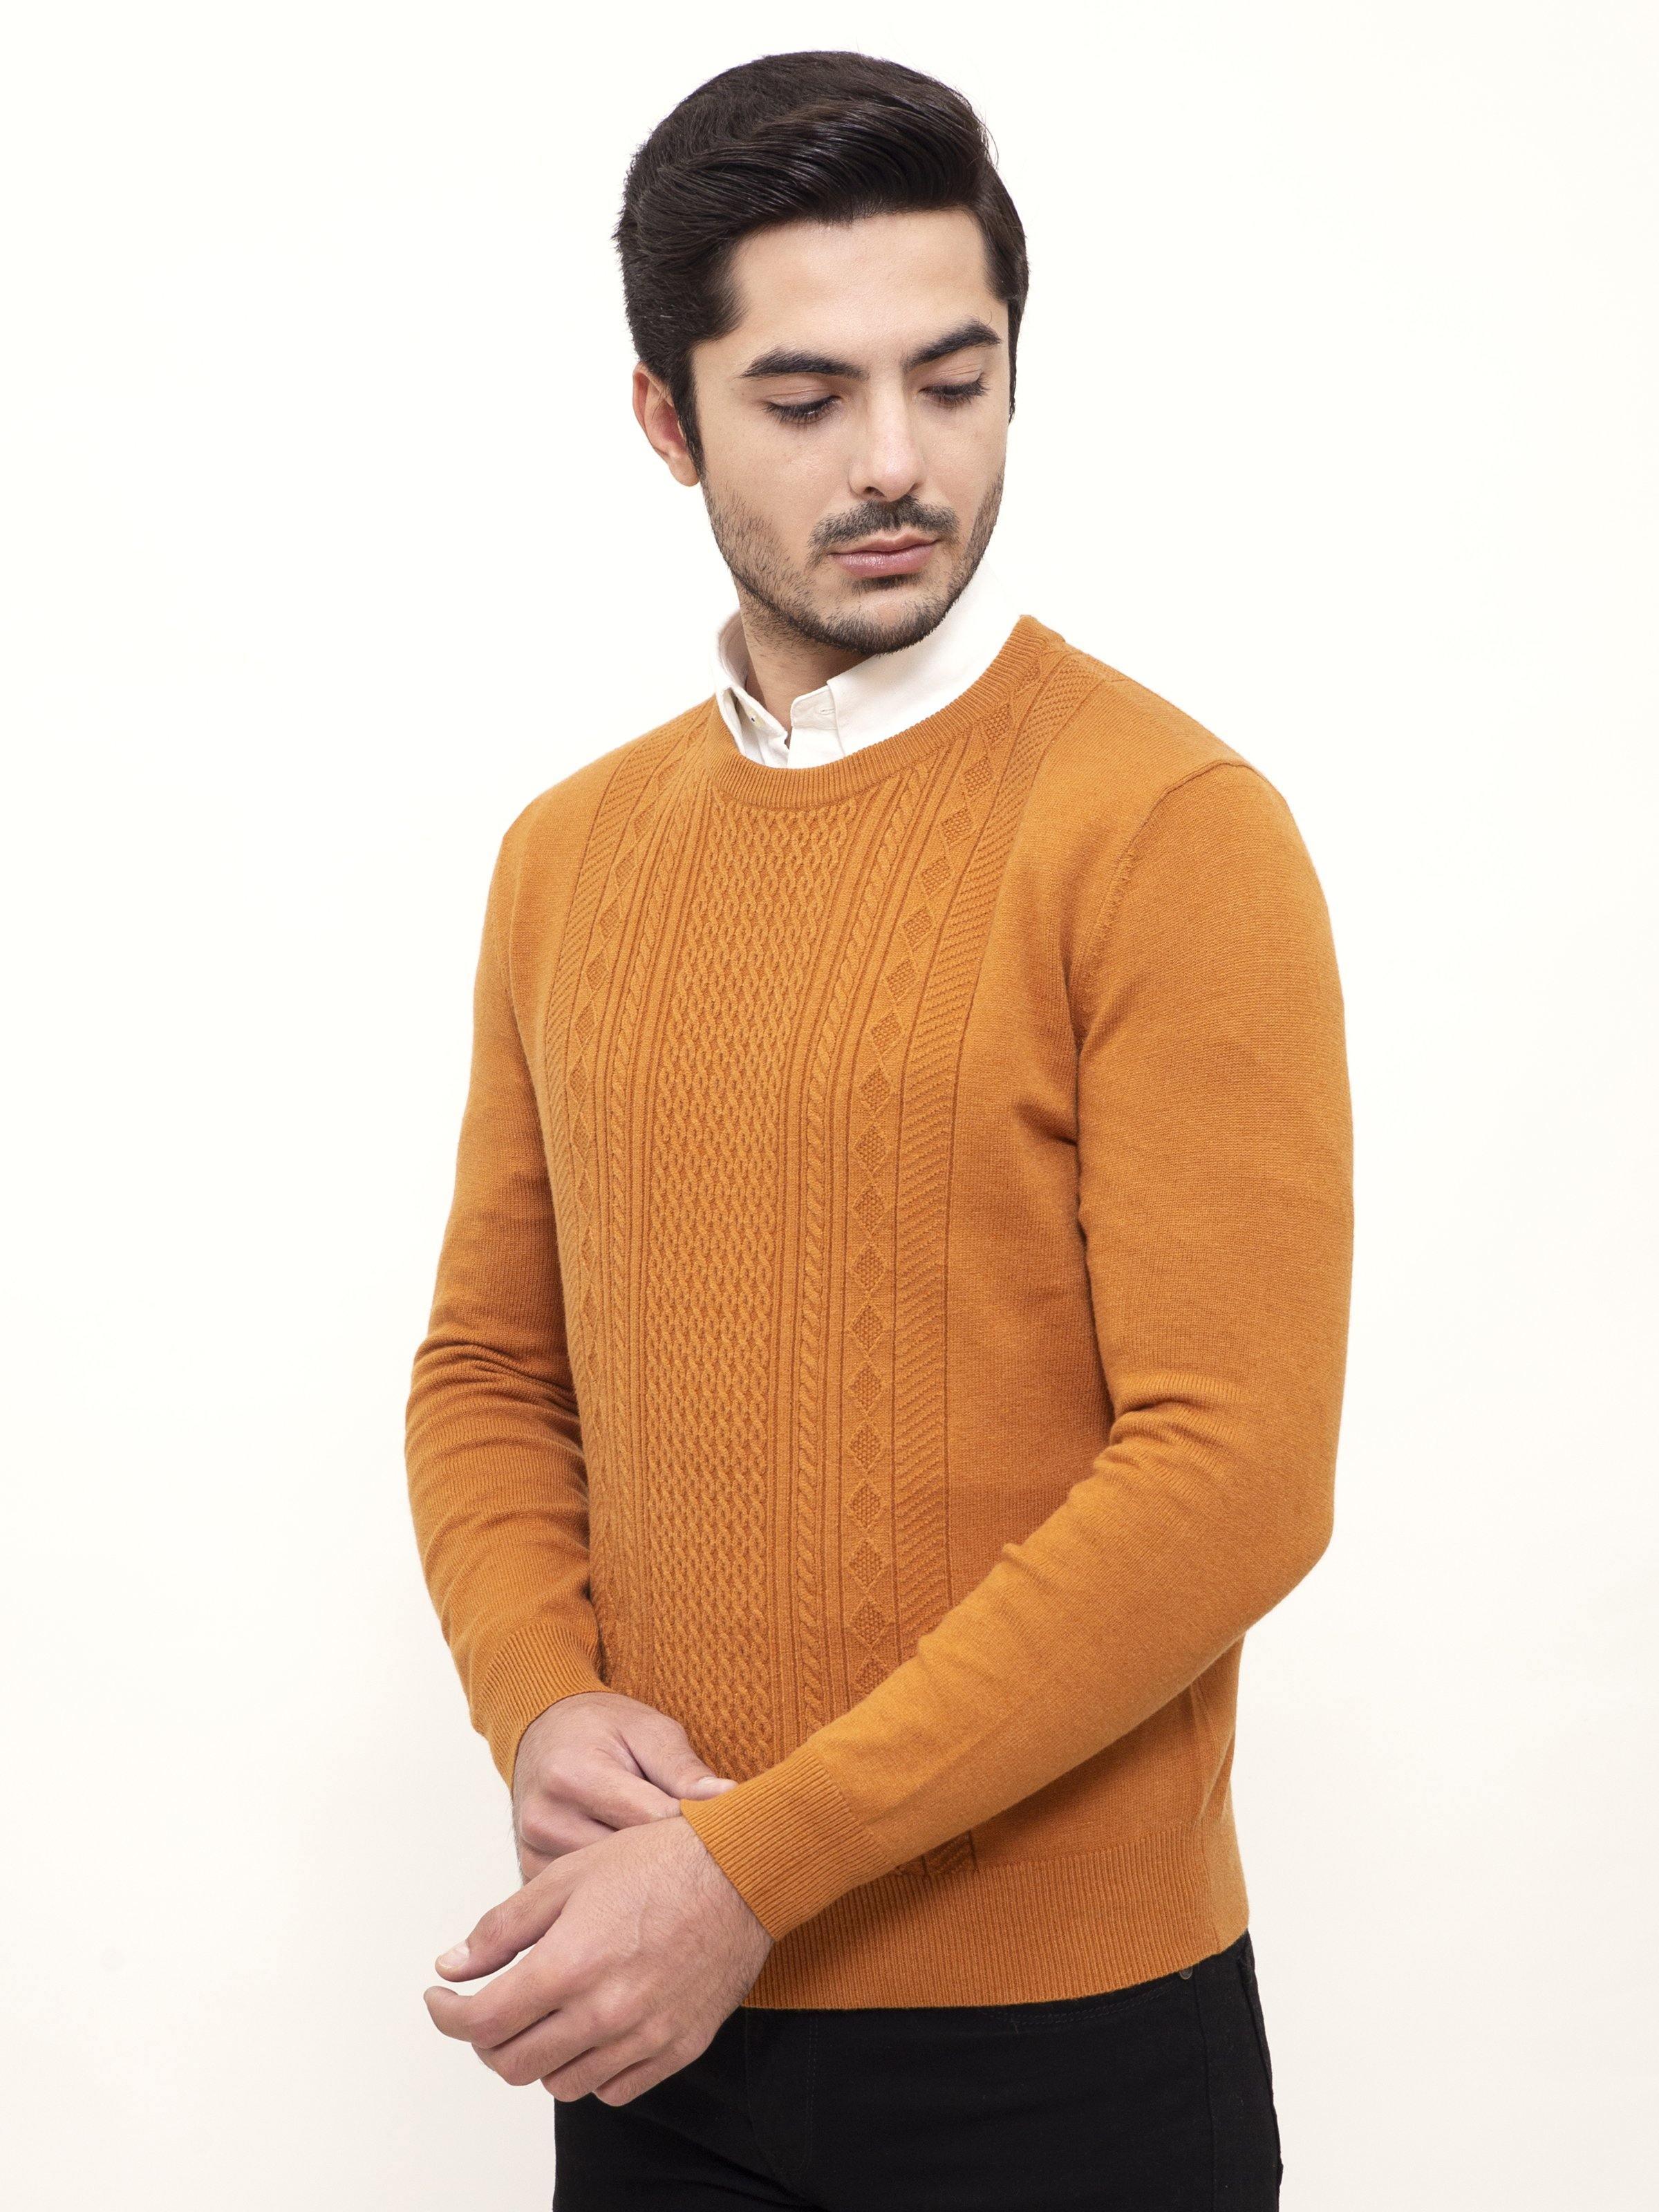 SWEATER ROUND NECK FULL SLEEVE MUSTARD at Charcoal Clothing